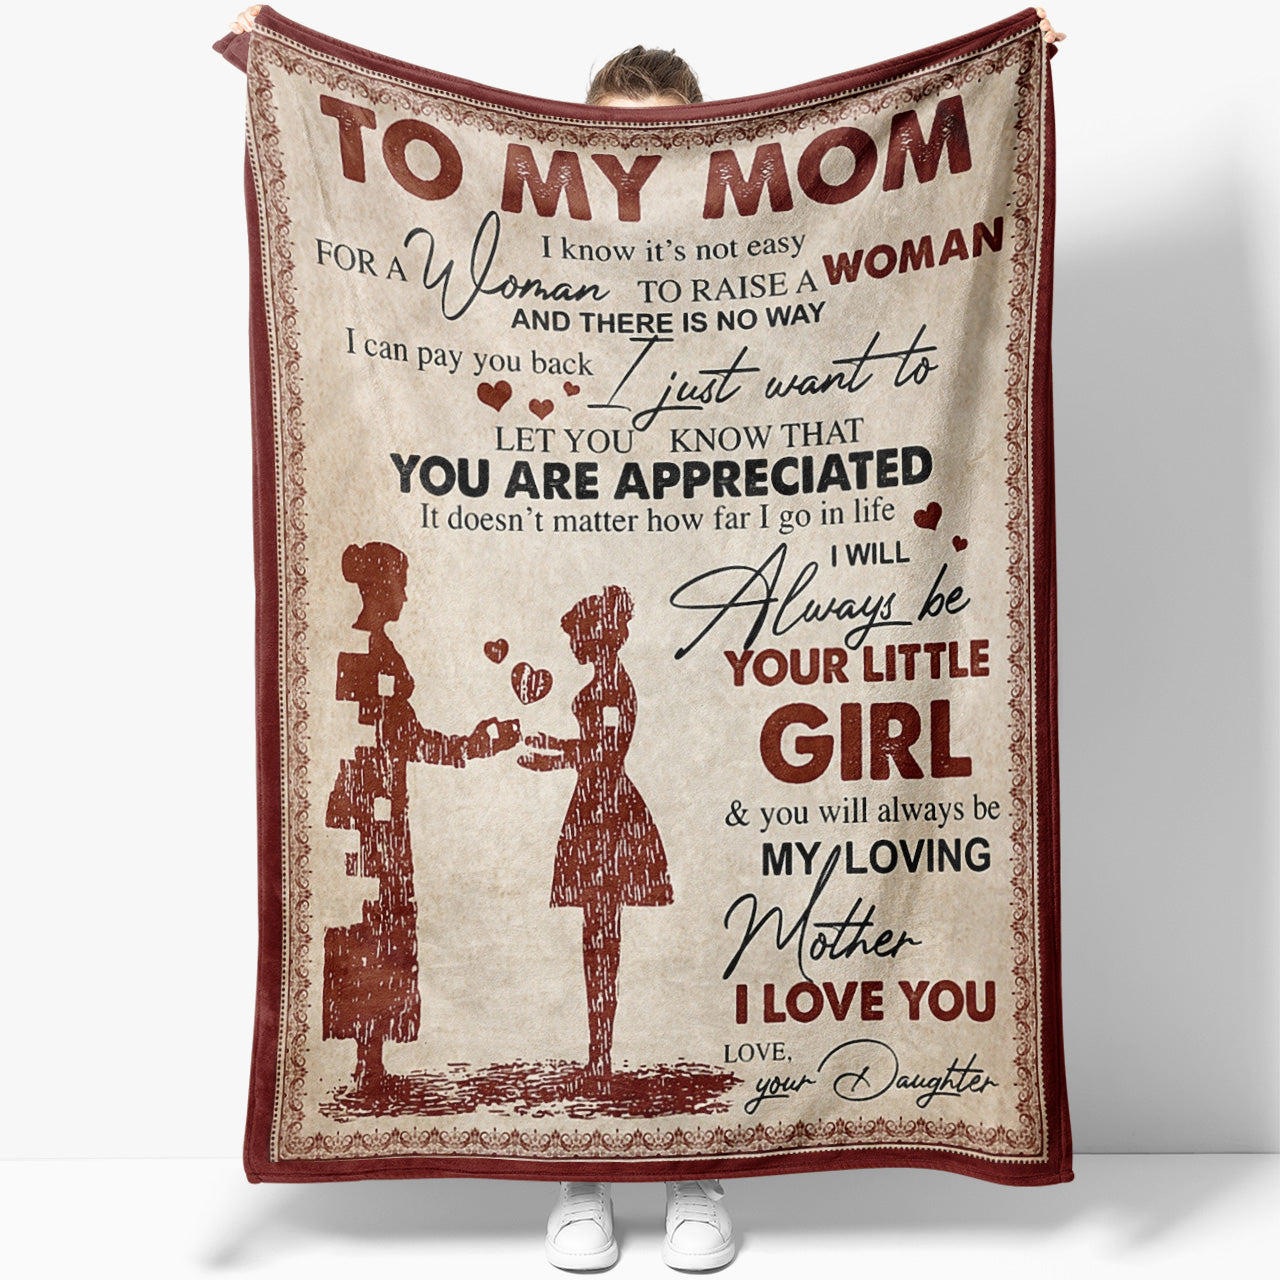 Blanket Gift ideas For Mom, Christmas Gifts For Mom, You Are